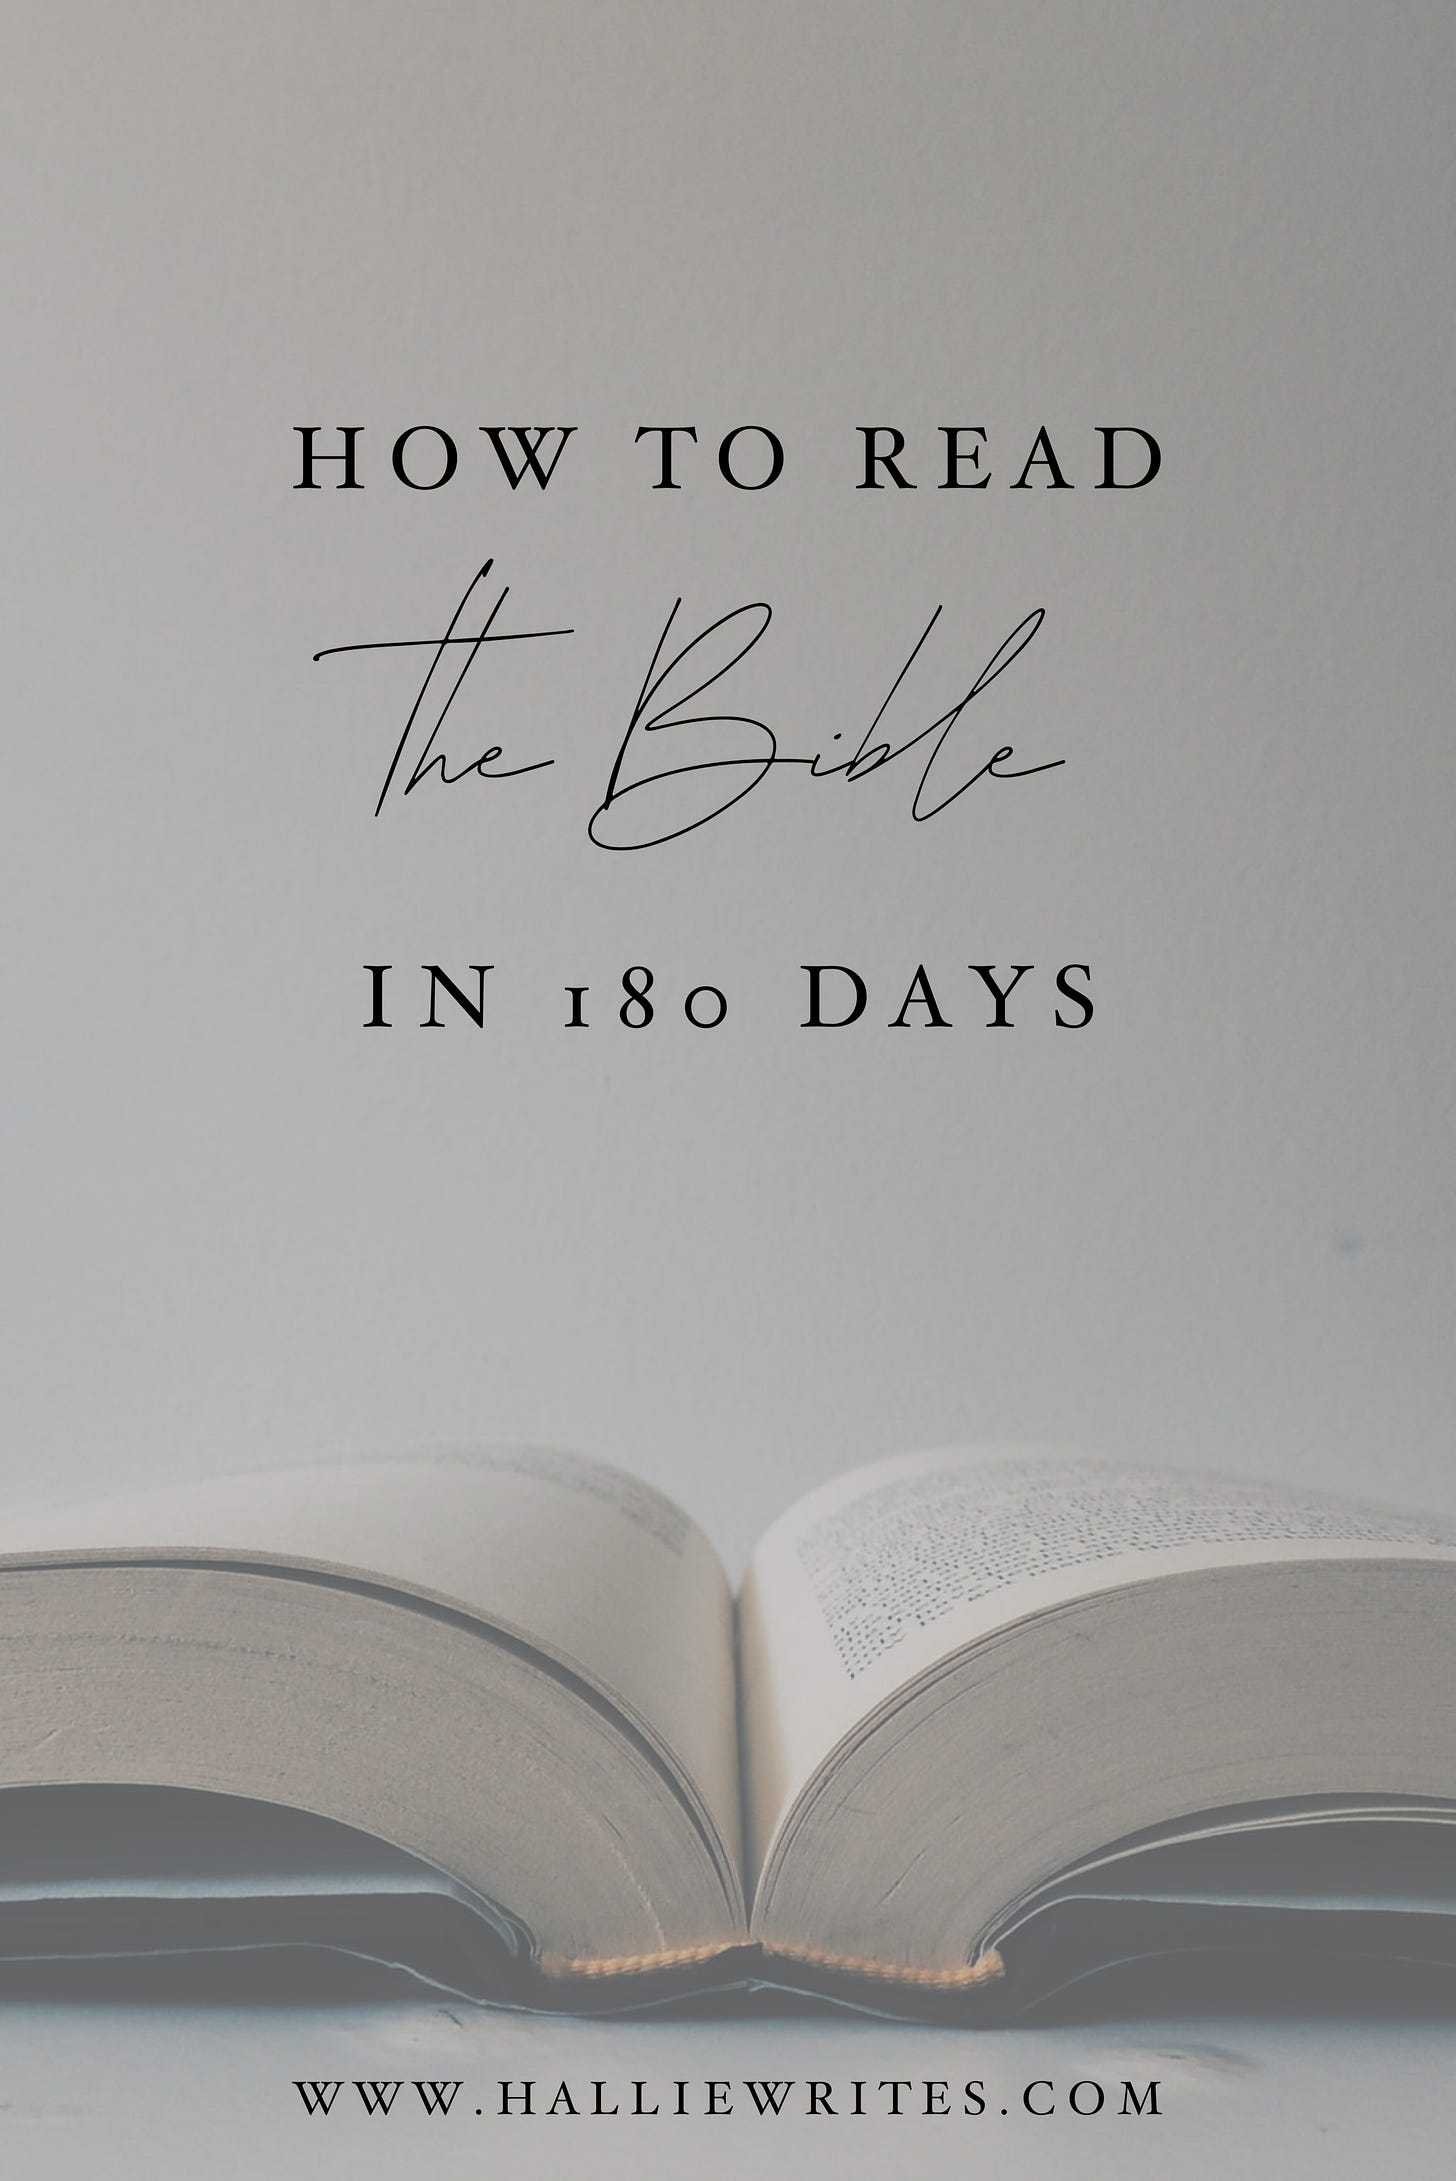 How to read the Bible in 180 days